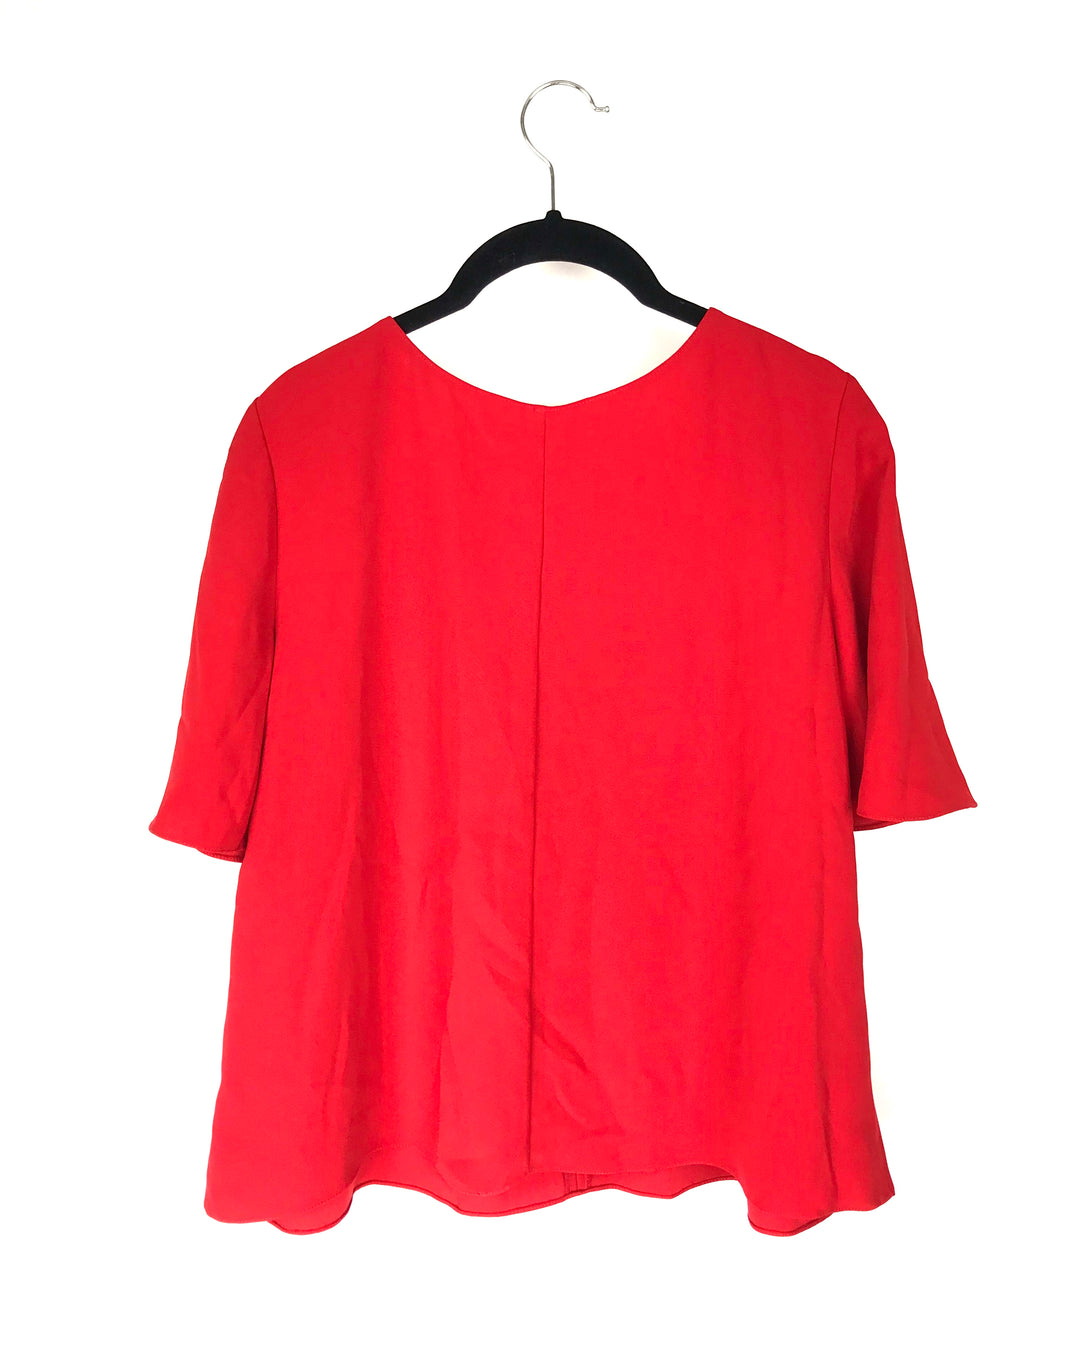 Bright Red V-Neck Top - Size 4-6